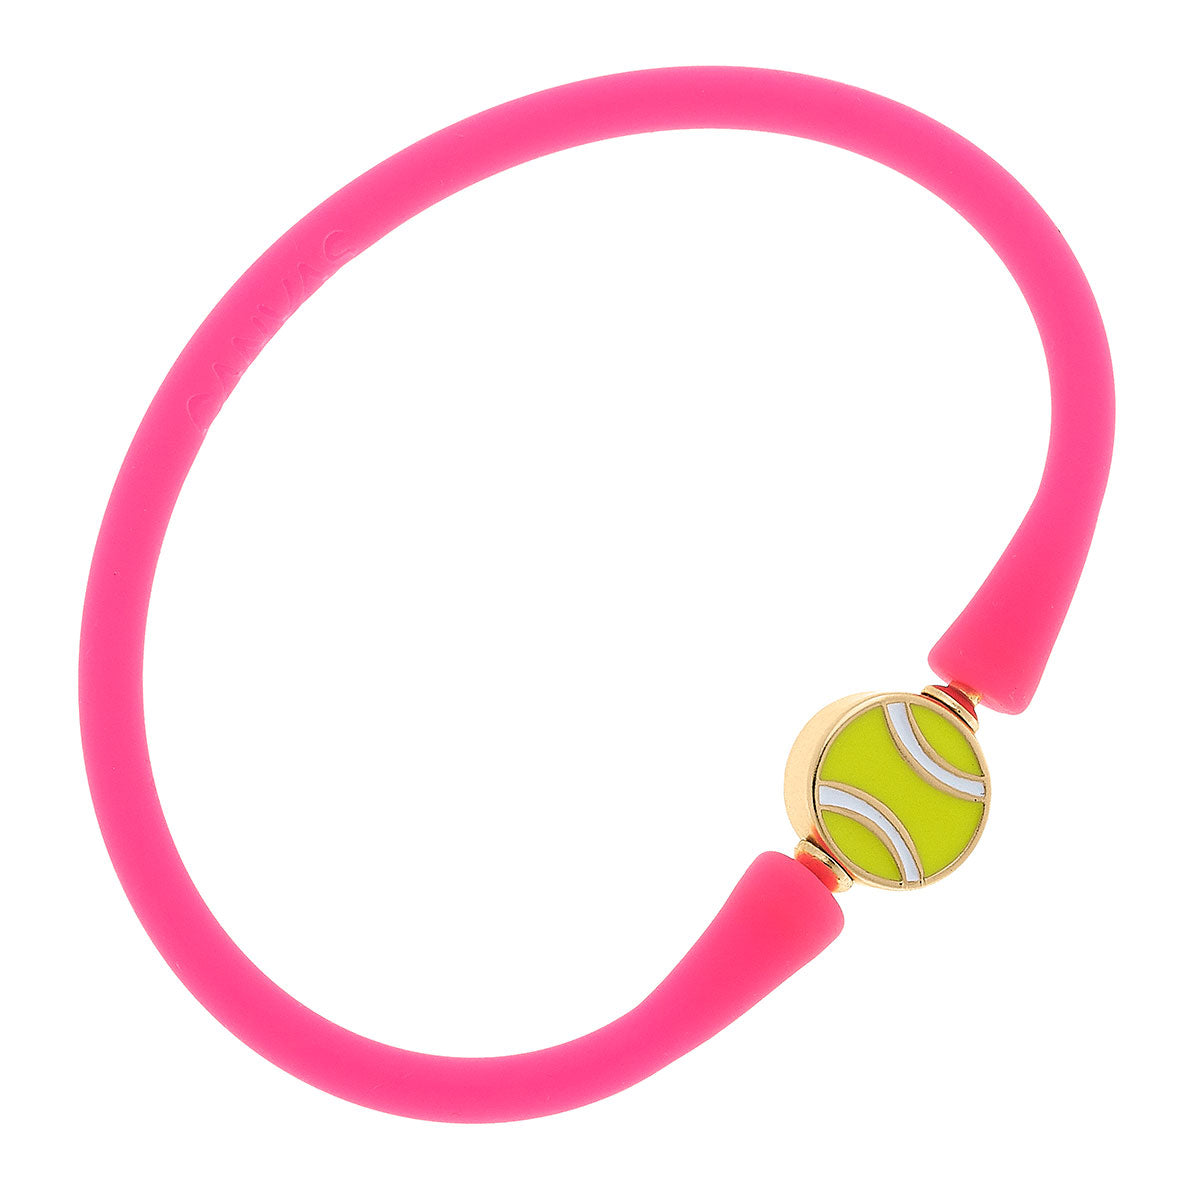 Bali Tennis Ball Bead Silicone Bracelet in Neon Pink